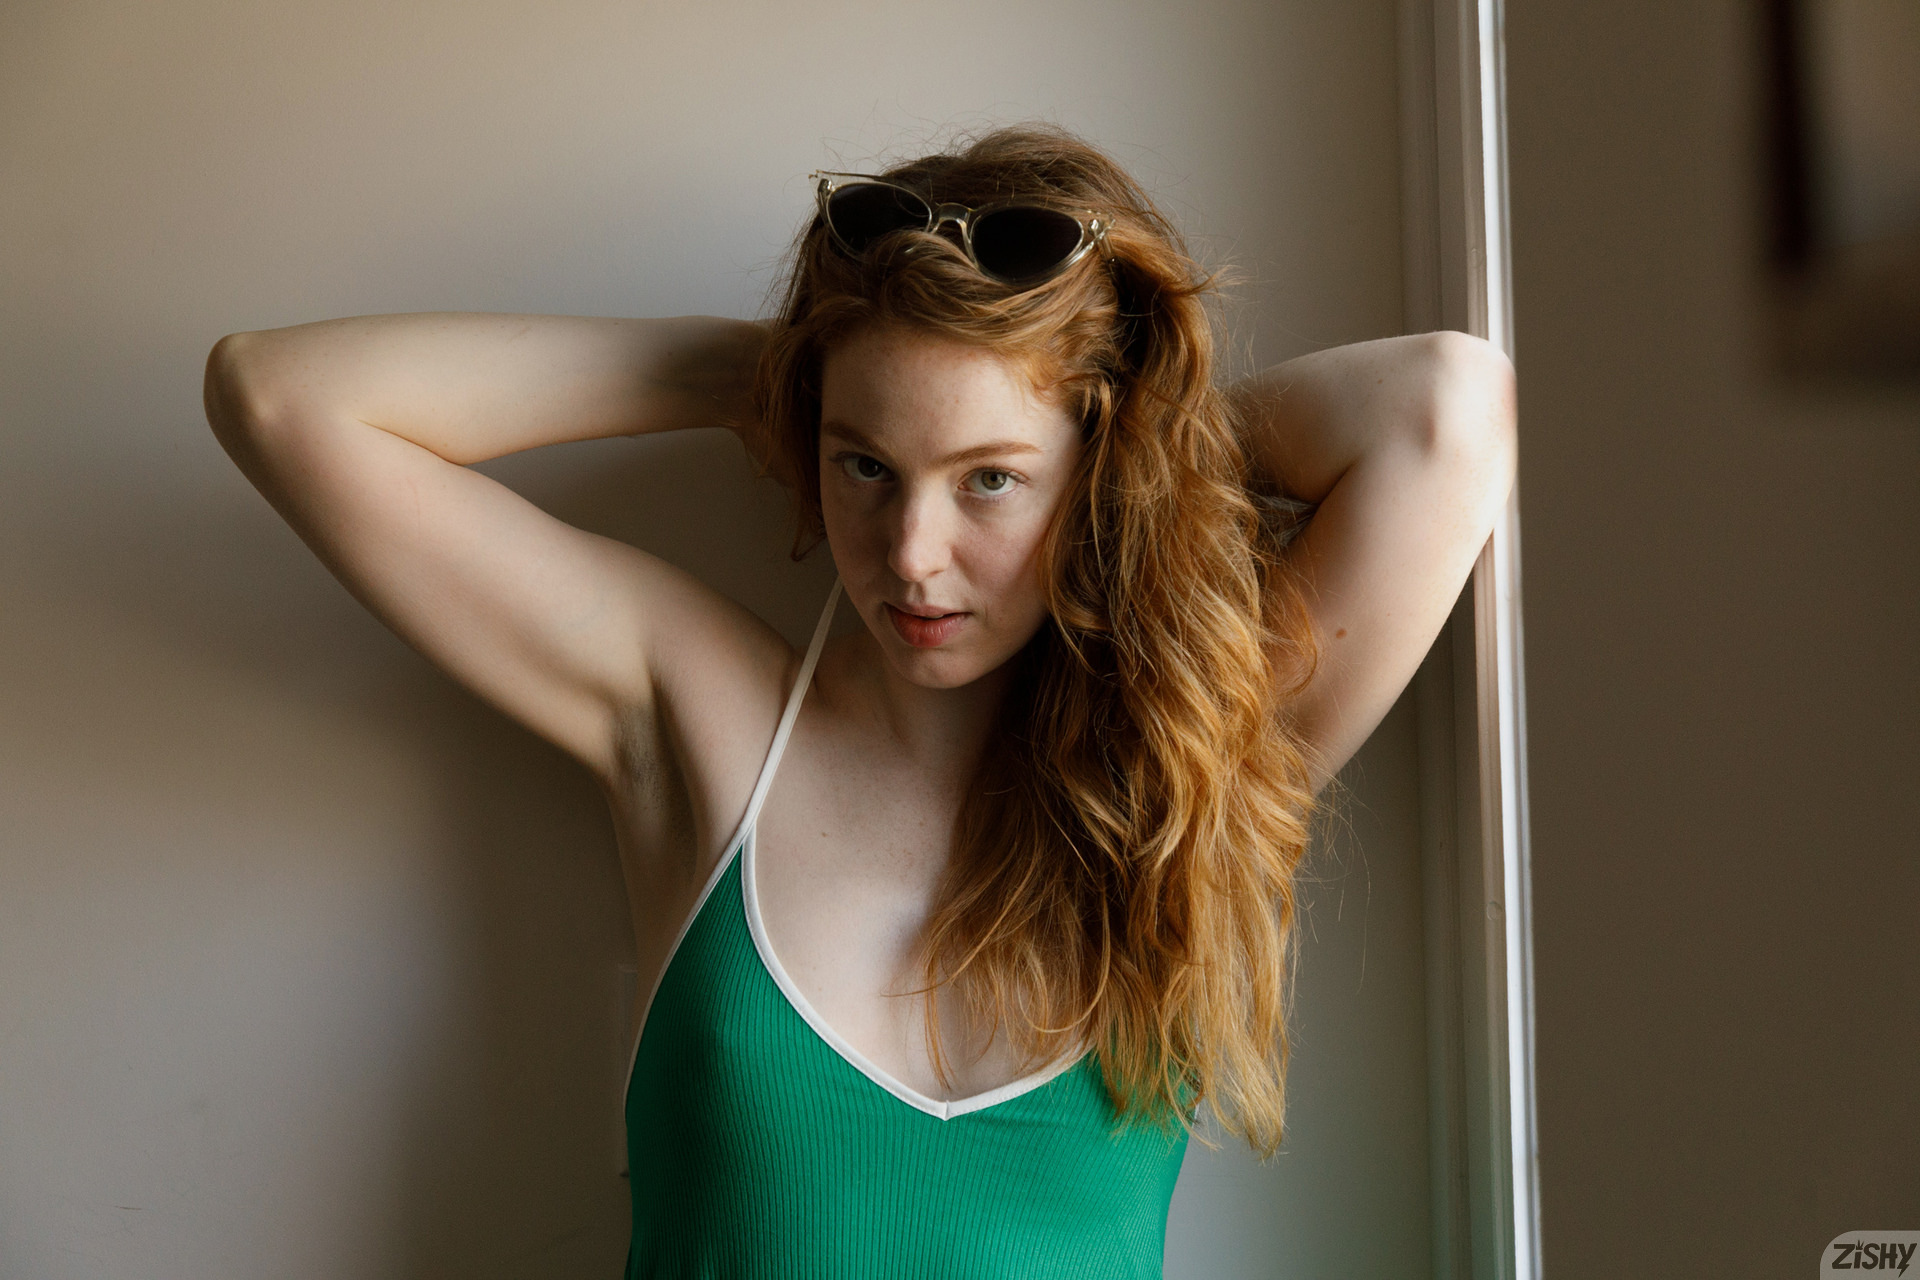 People 1920x1280 Zishy Erna O'Hara arms up armpits looking at viewer women with shades sunglasses women indoors indoors long hair redhead women model watermarked